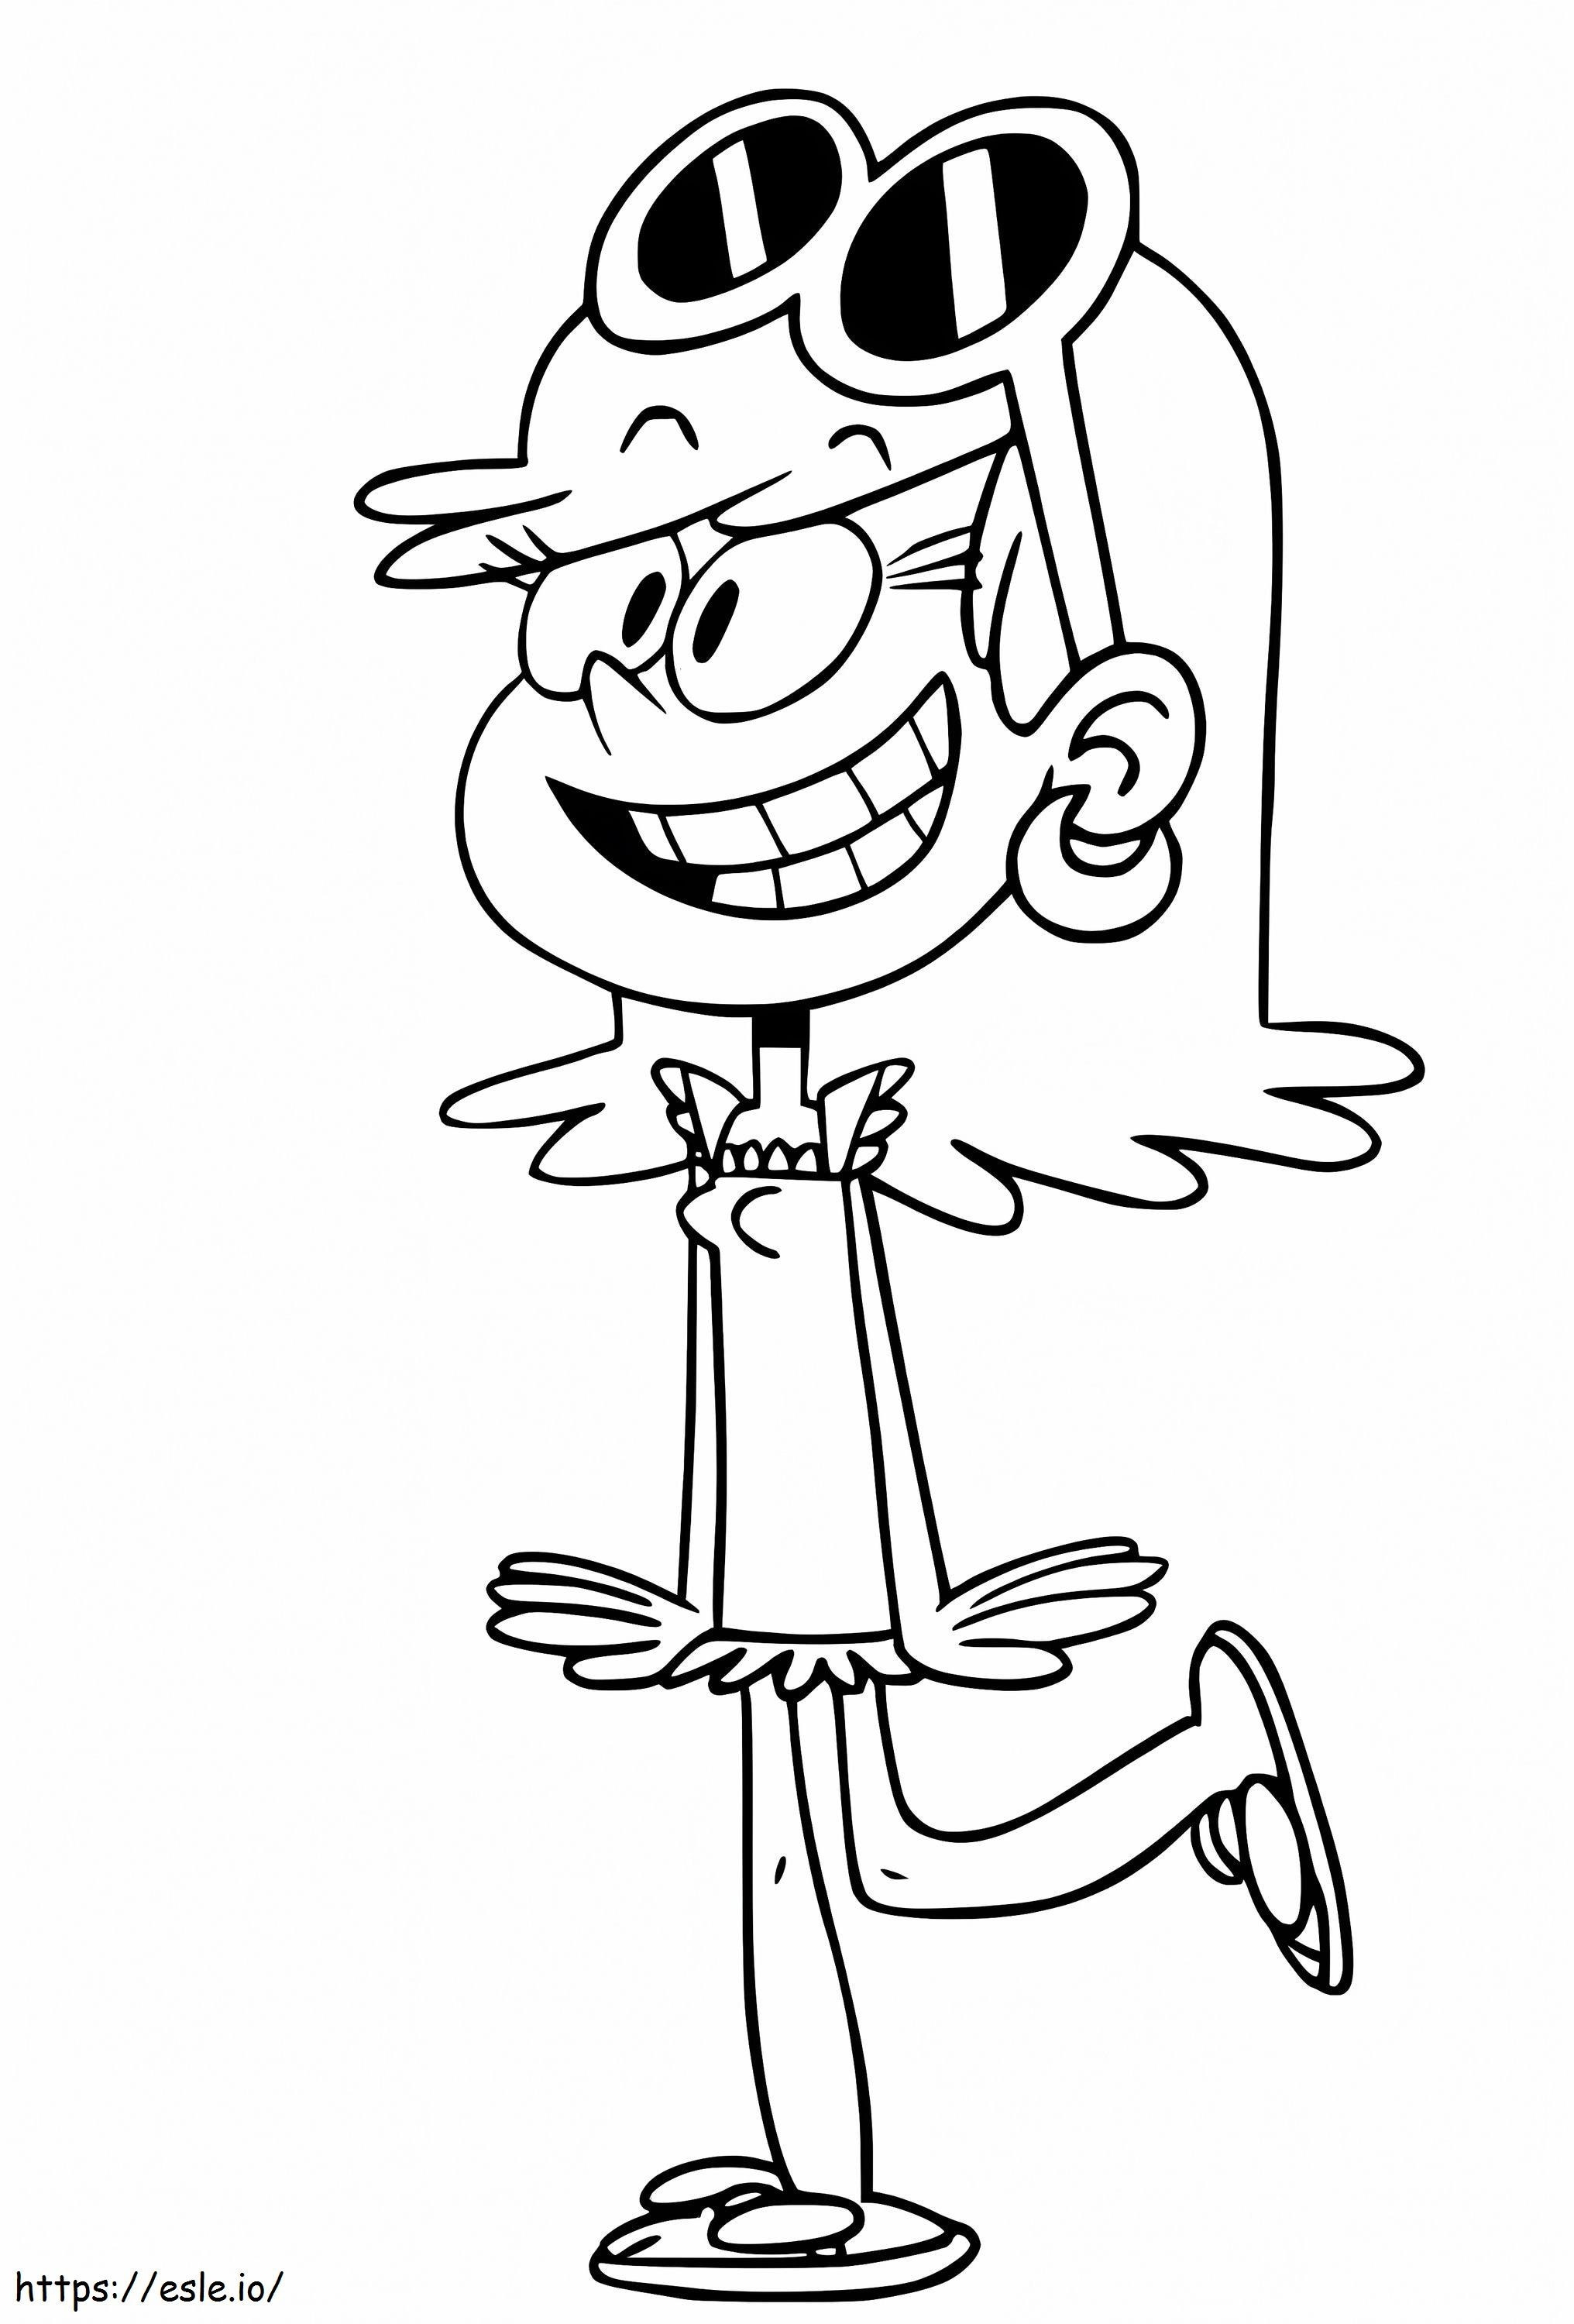 Lenny Loud coloring page